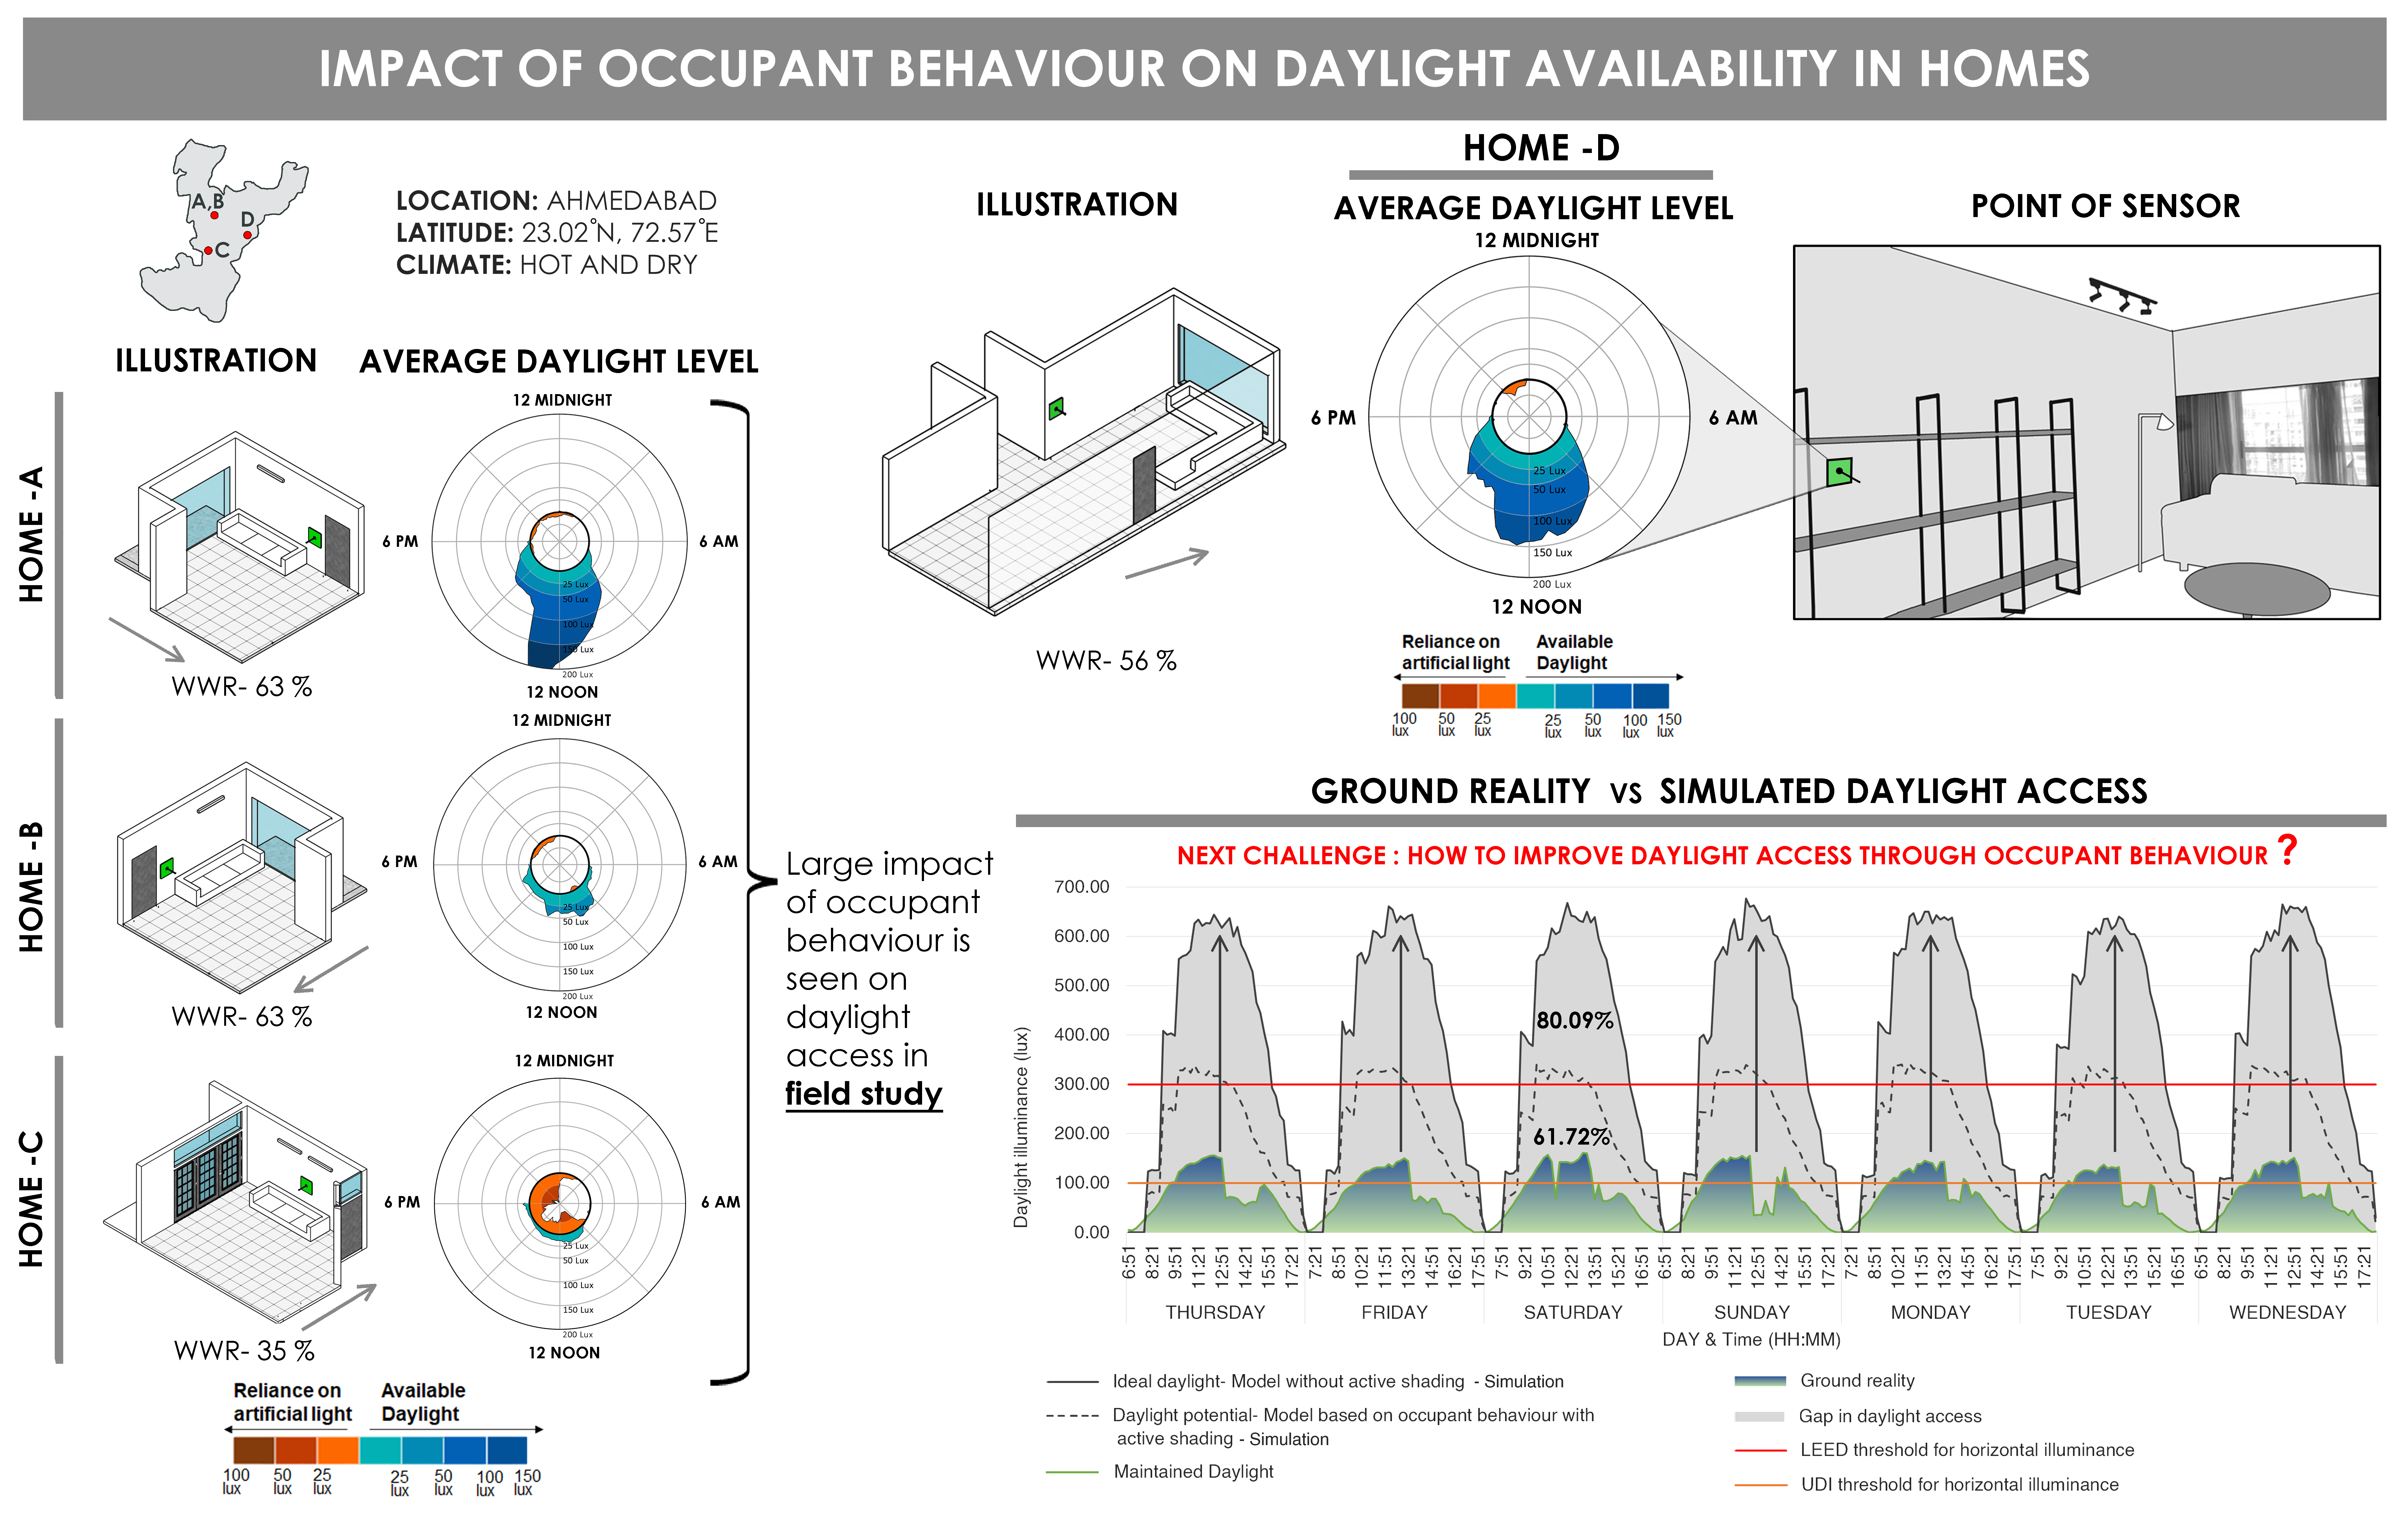 What is the impact of occupant behaviour on daylight availability in homes?